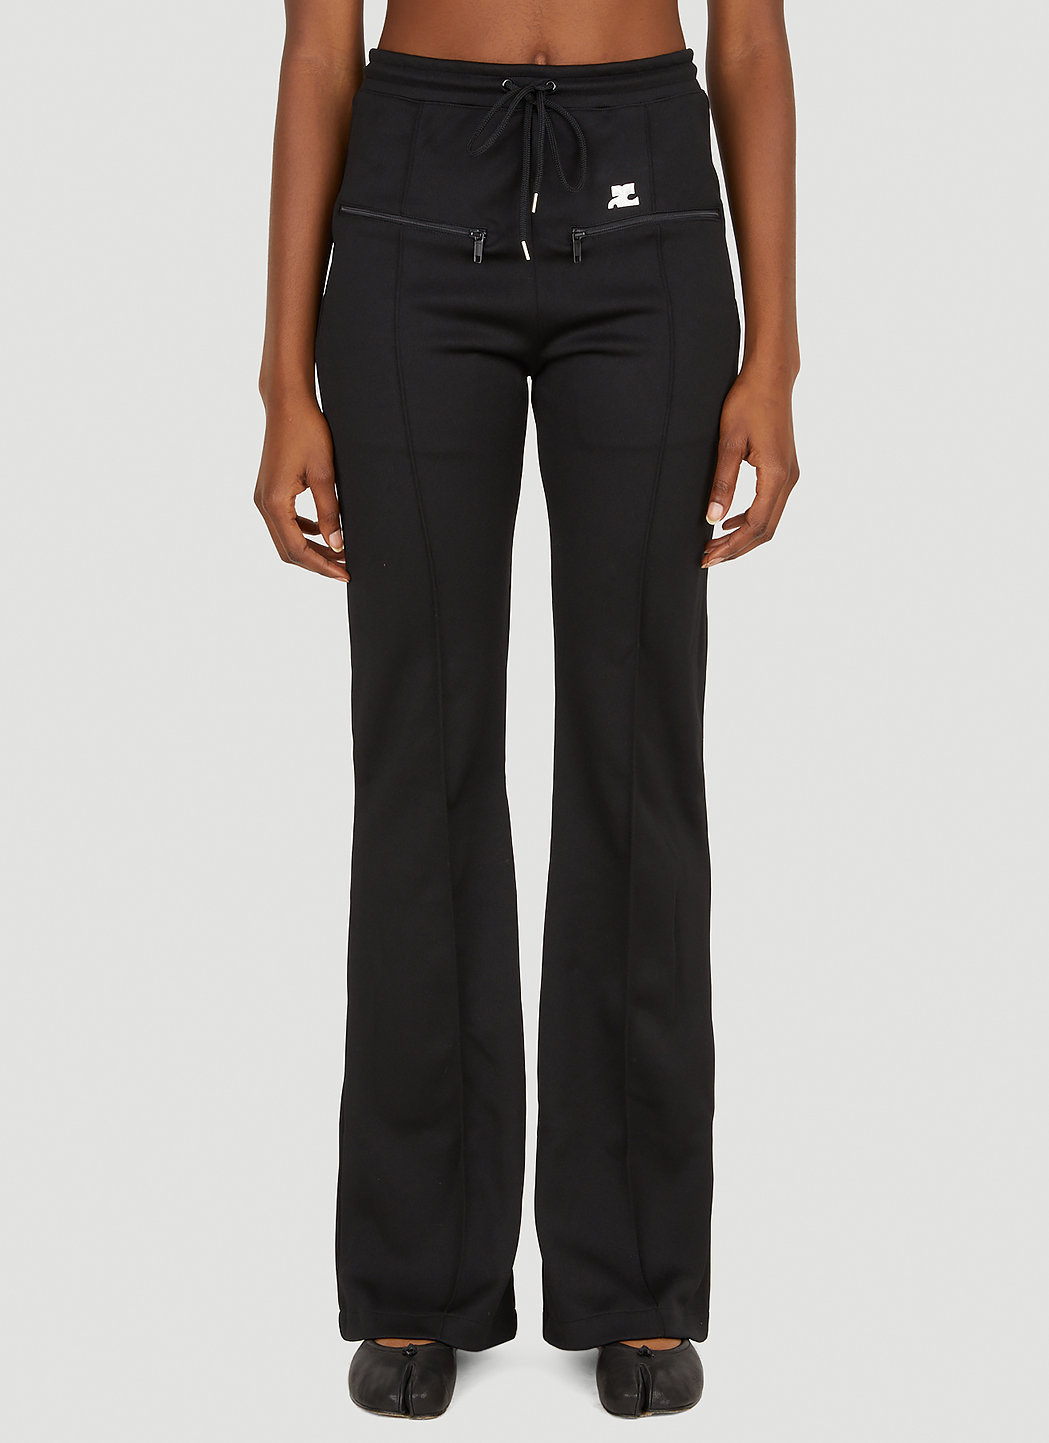 Women's Flared Track Pants by Courreges